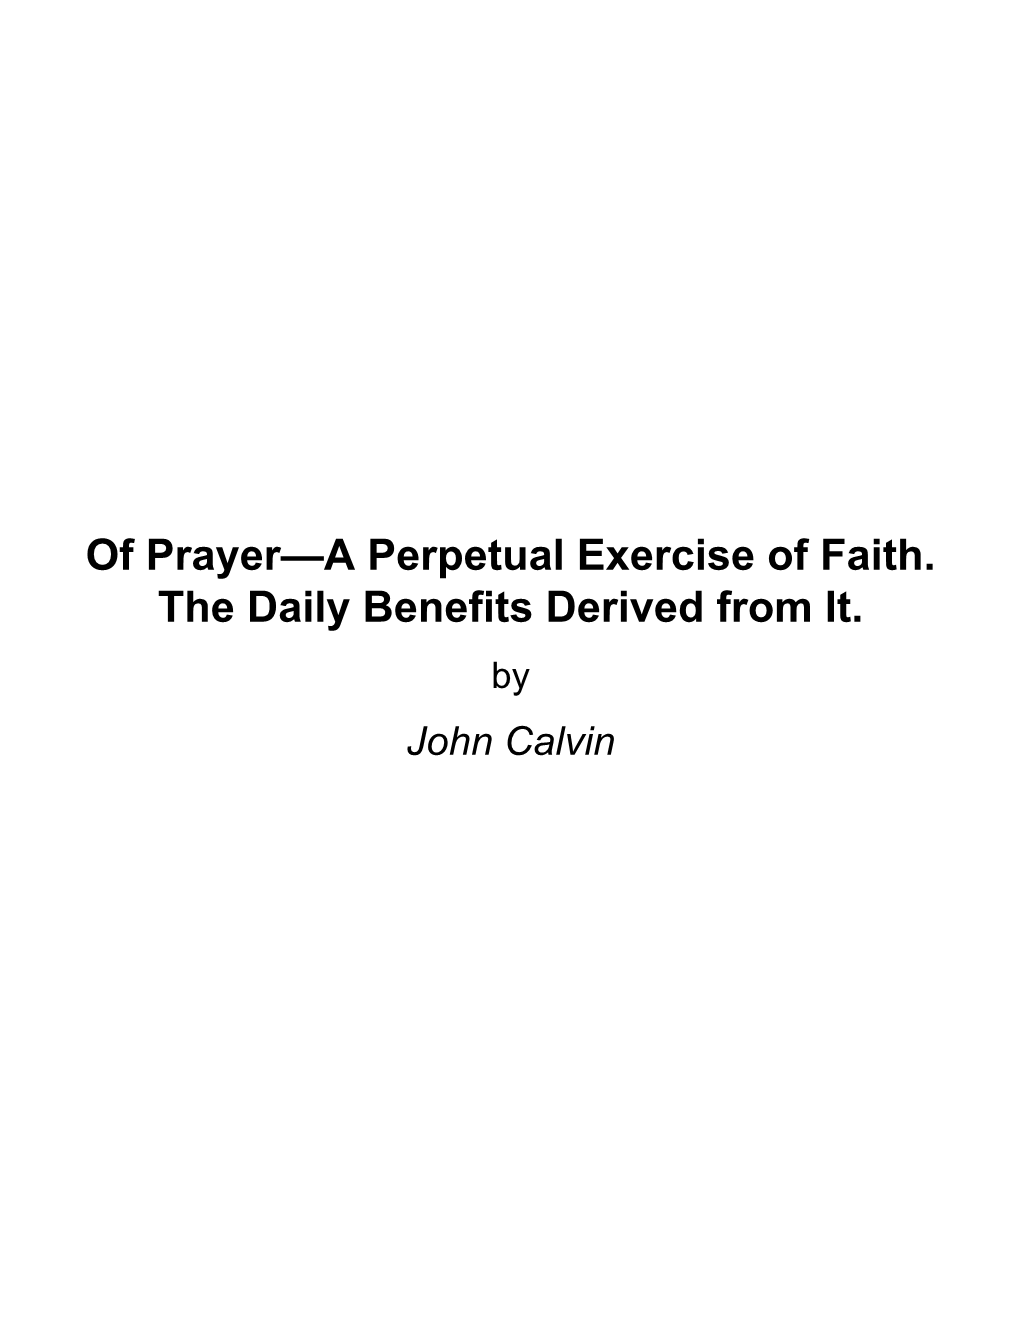 Of Prayer—A Perpetual Exercise of Faith. the Daily Benefits Derived